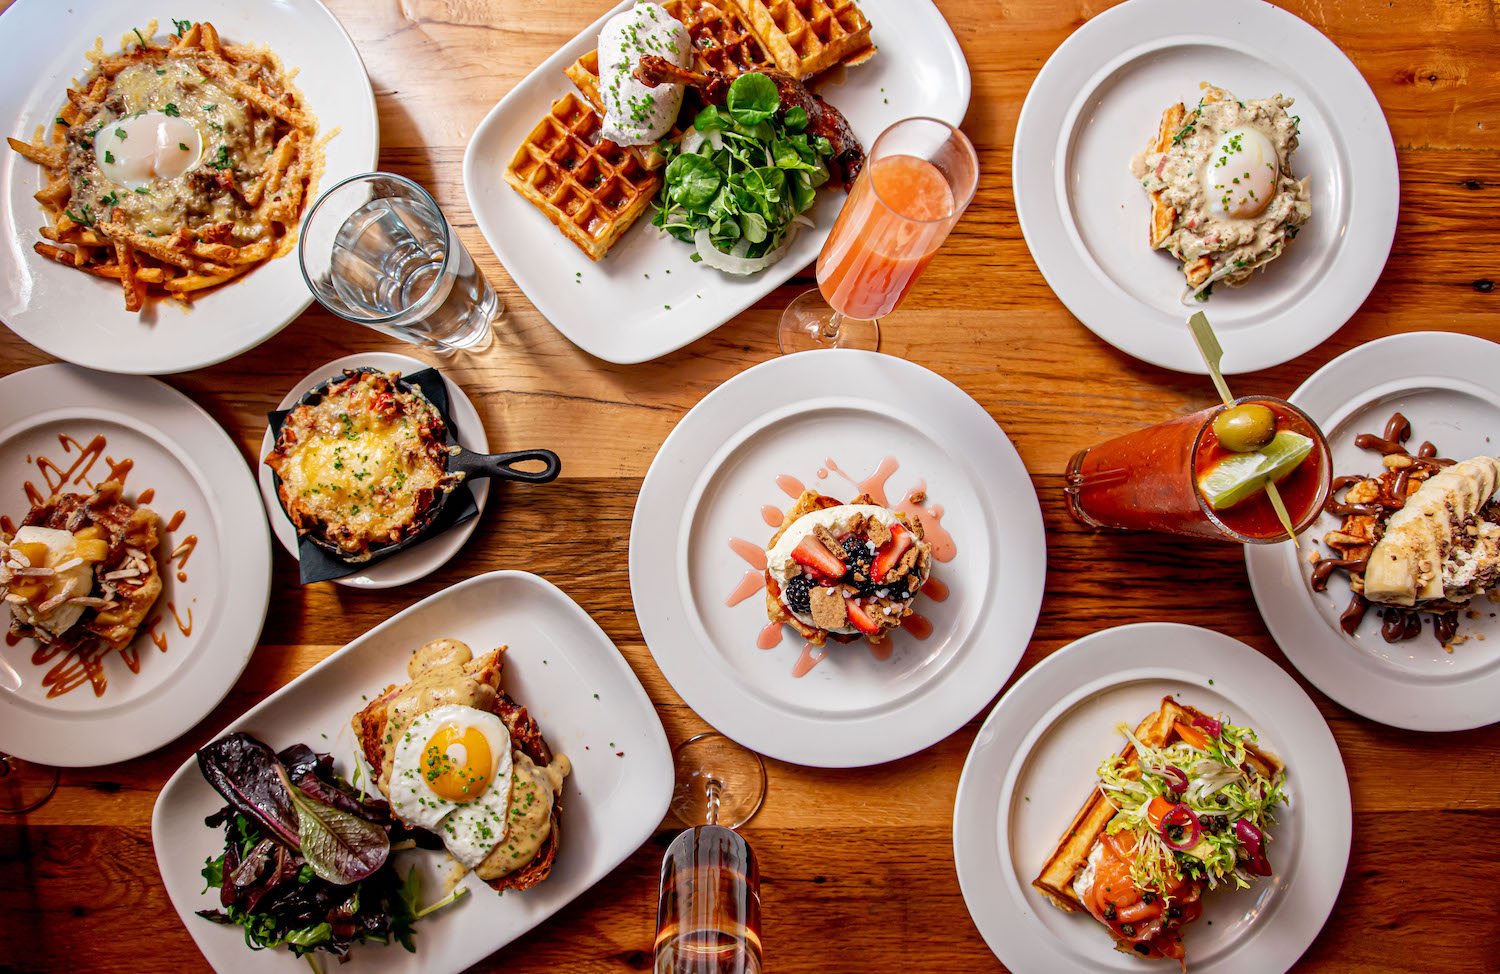 Birds-eye view of a table filled with various brunch plates 